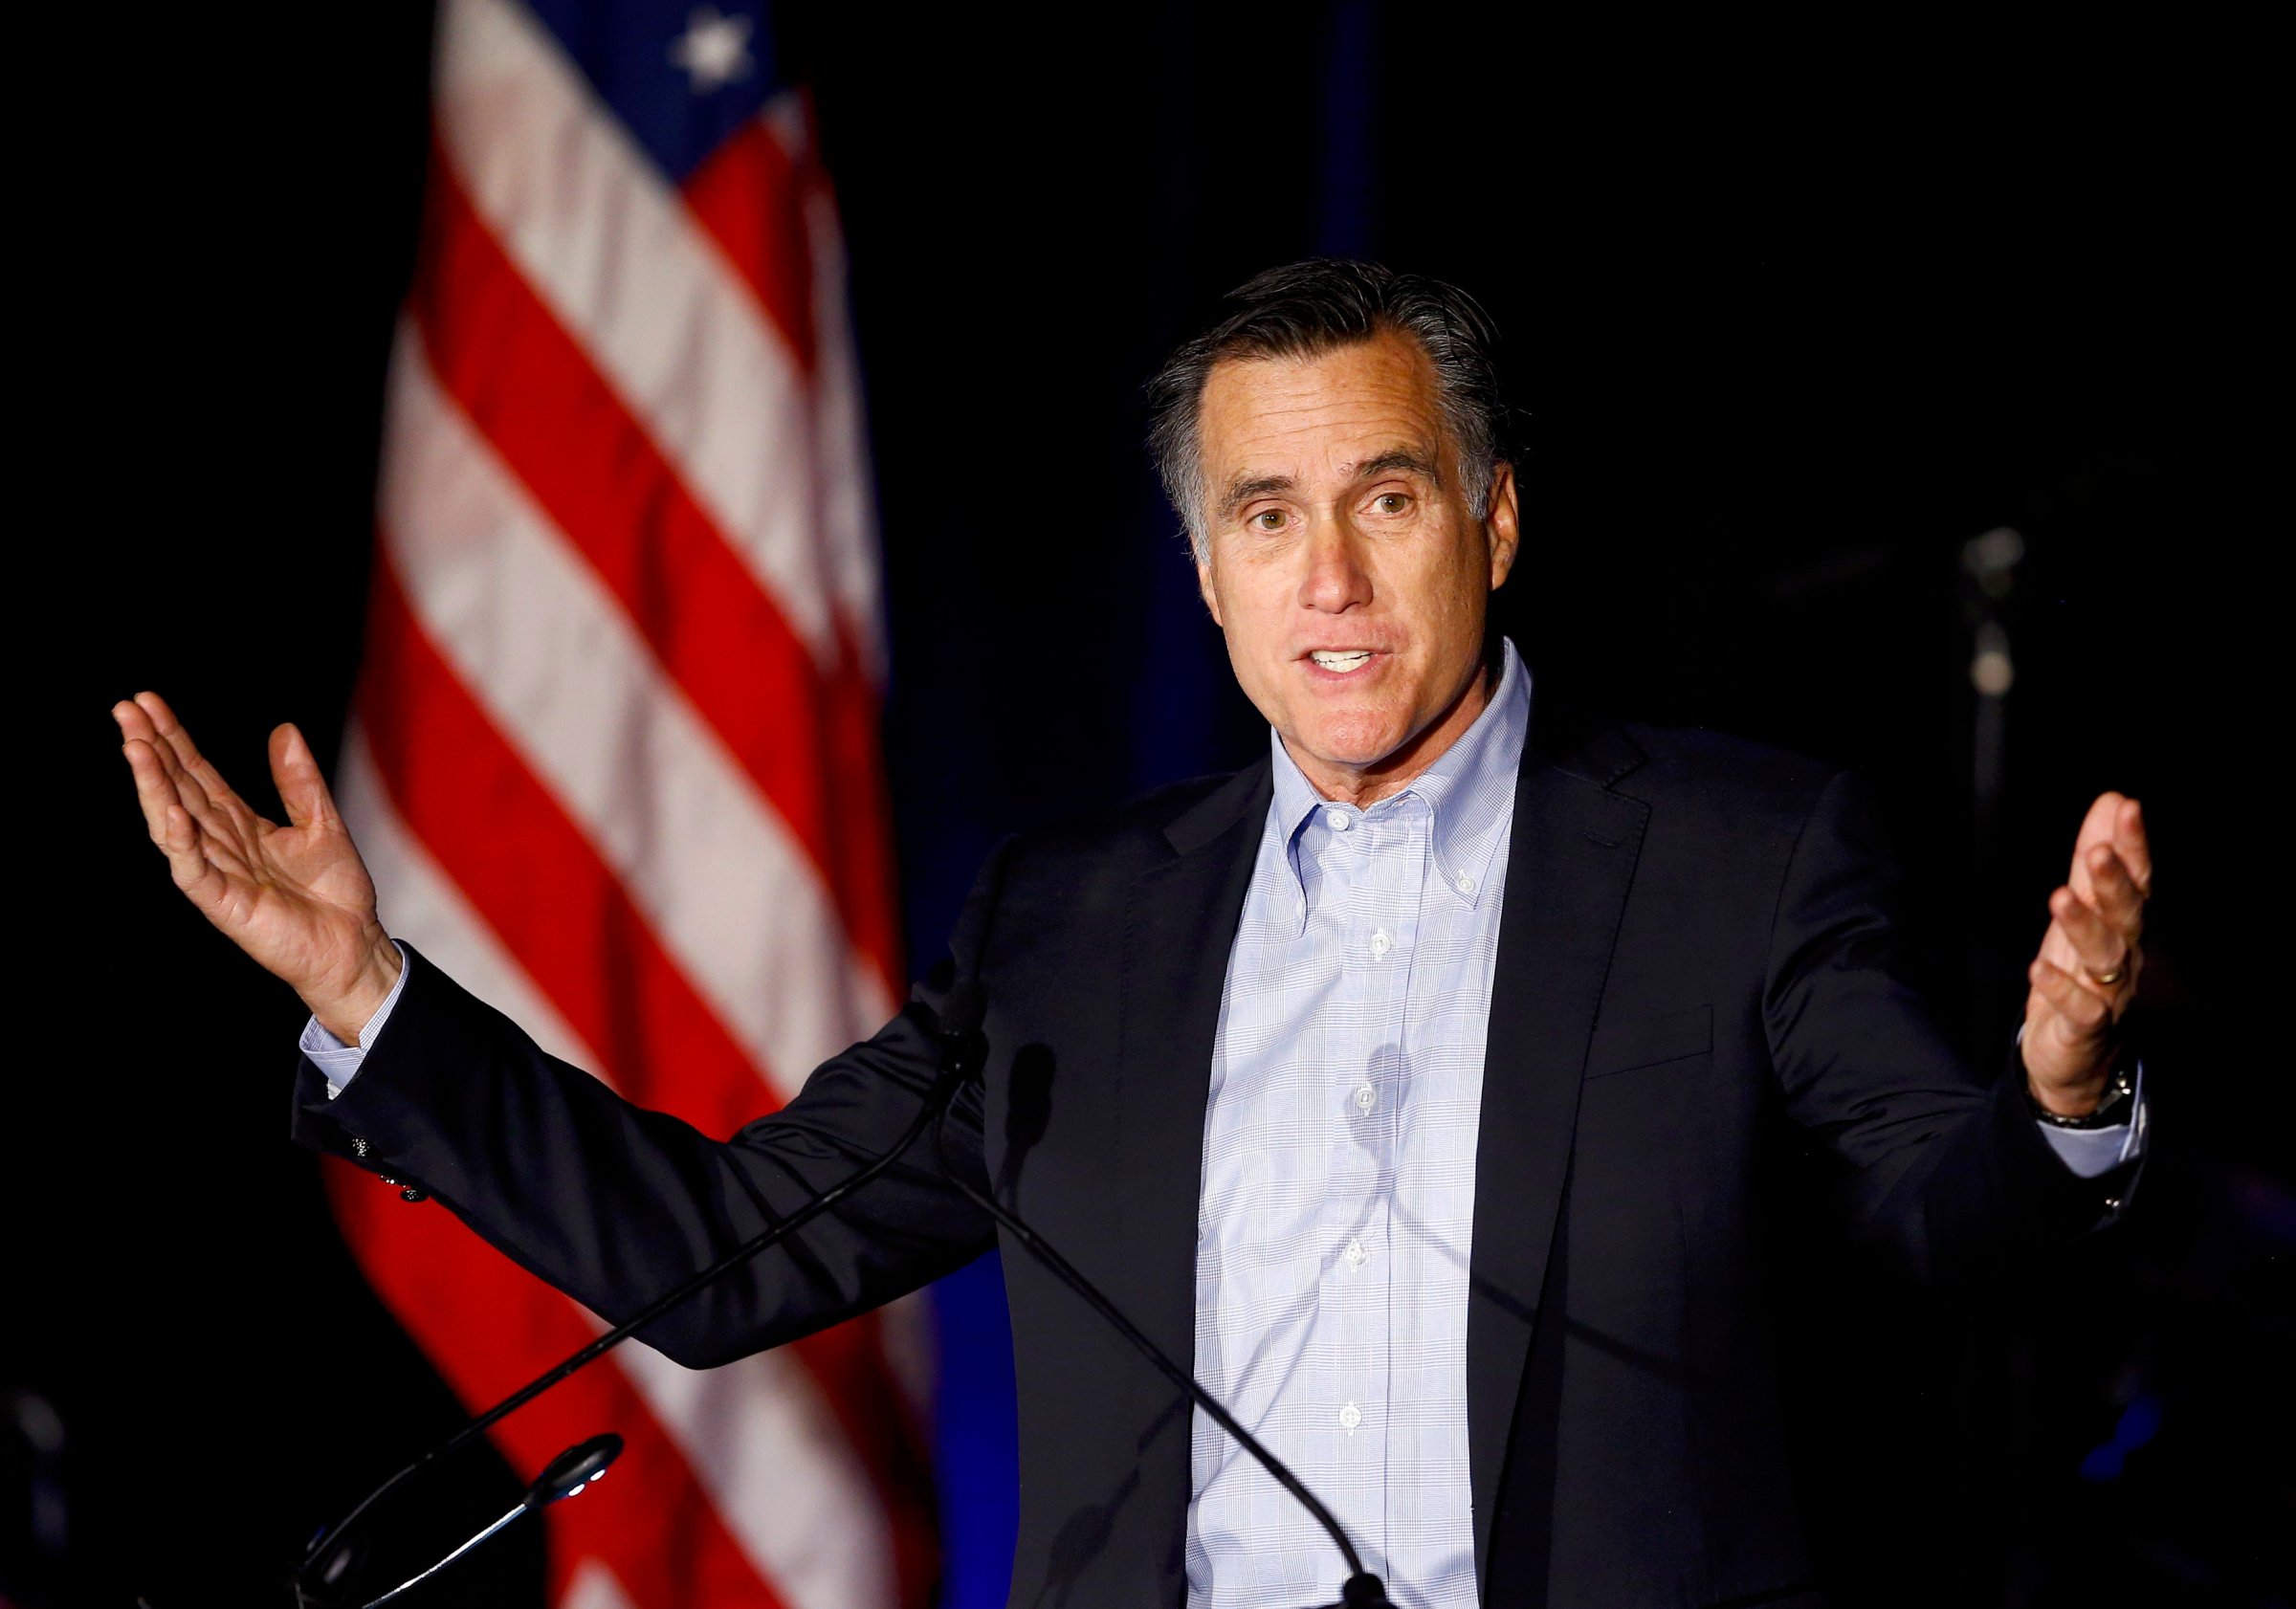 Former presidential candidate Mitt Romney speaks at the Republican National Convention winter meetings in San Diego